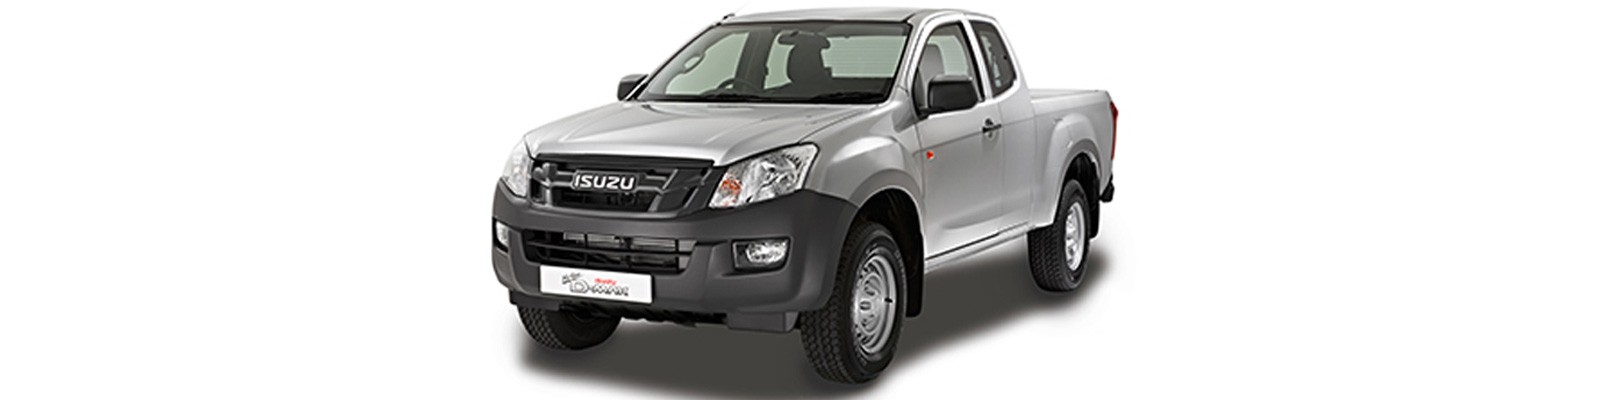 Accessories for Isuzu D-Max Extended Cab 2012-2016